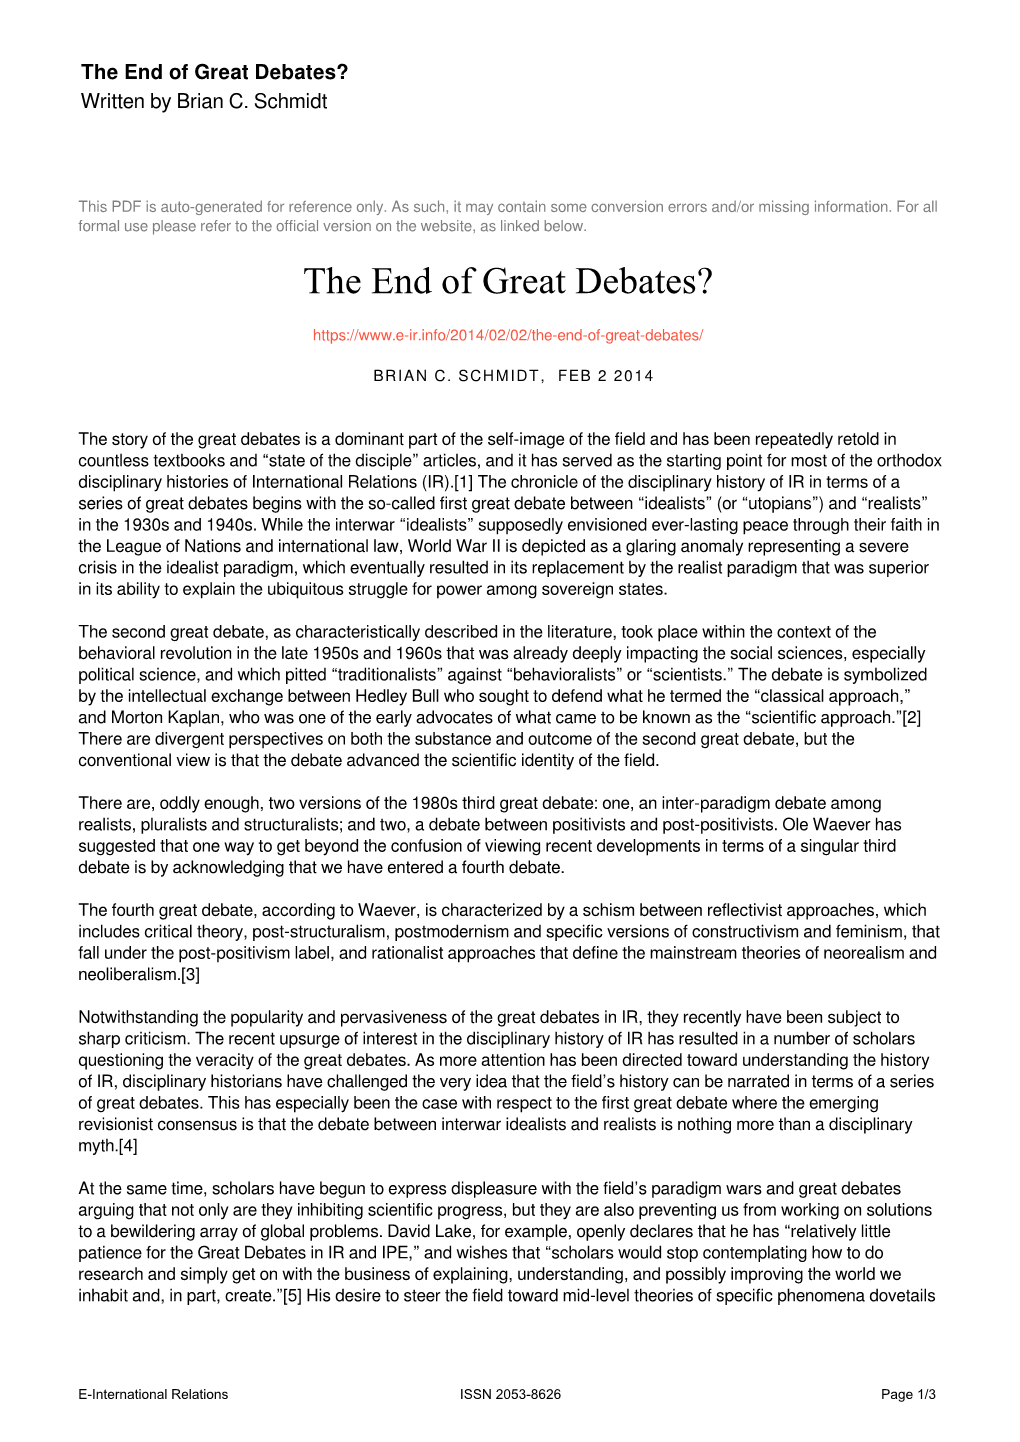 The End of Great Debates? Written by Brian C